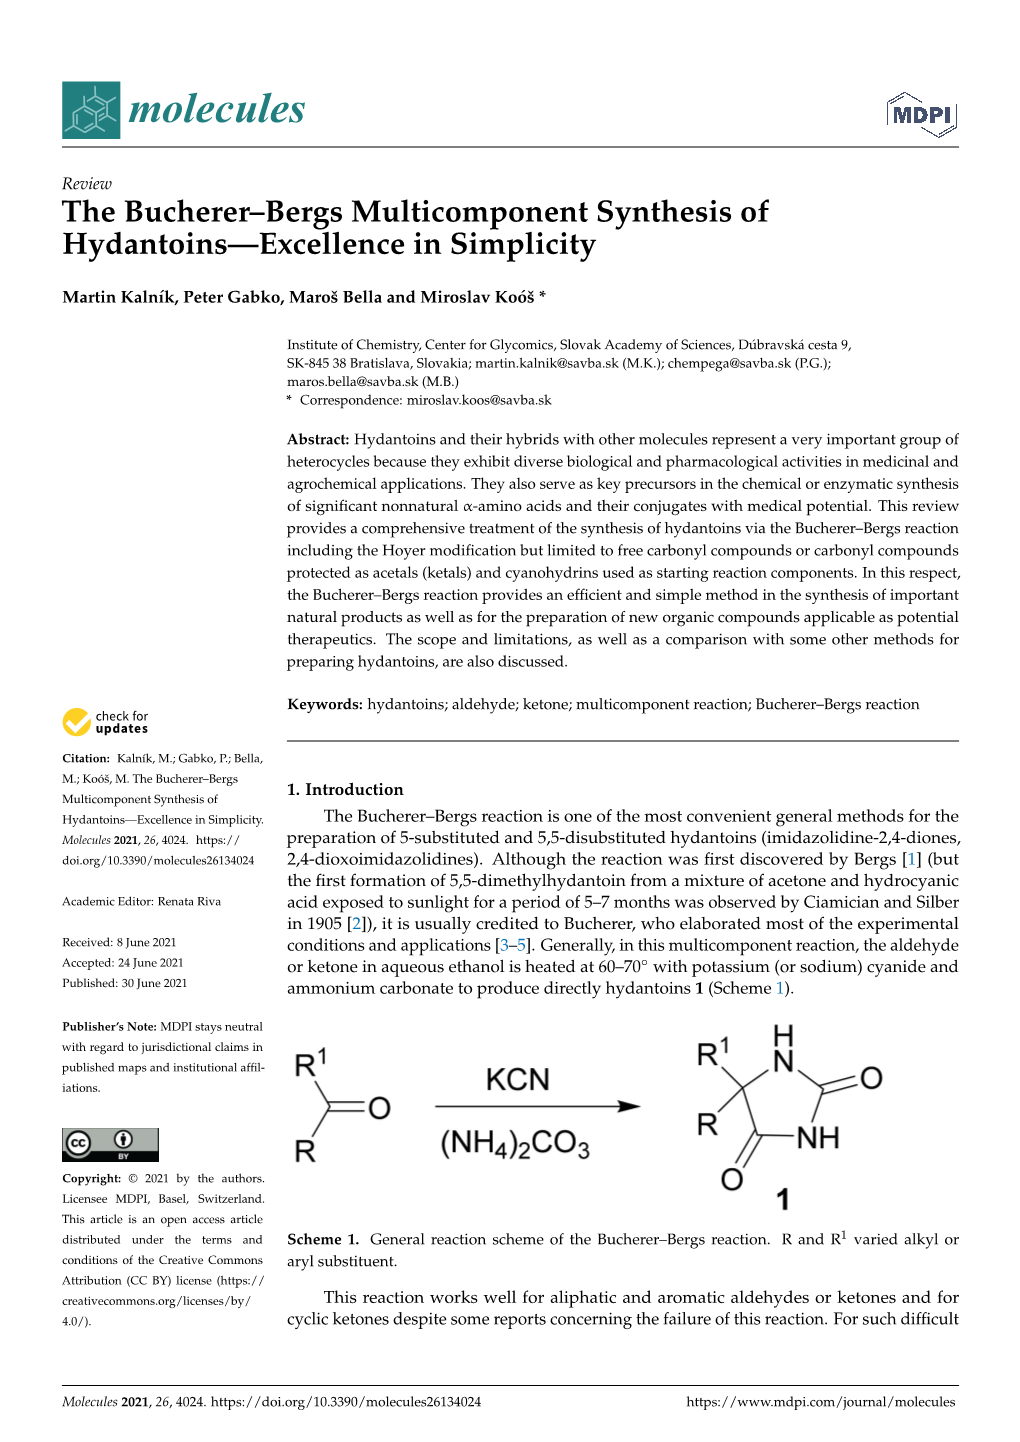 The Bucherer–Bergs Multicomponent Synthesis of Hydantoins—Excellence in Simplicity